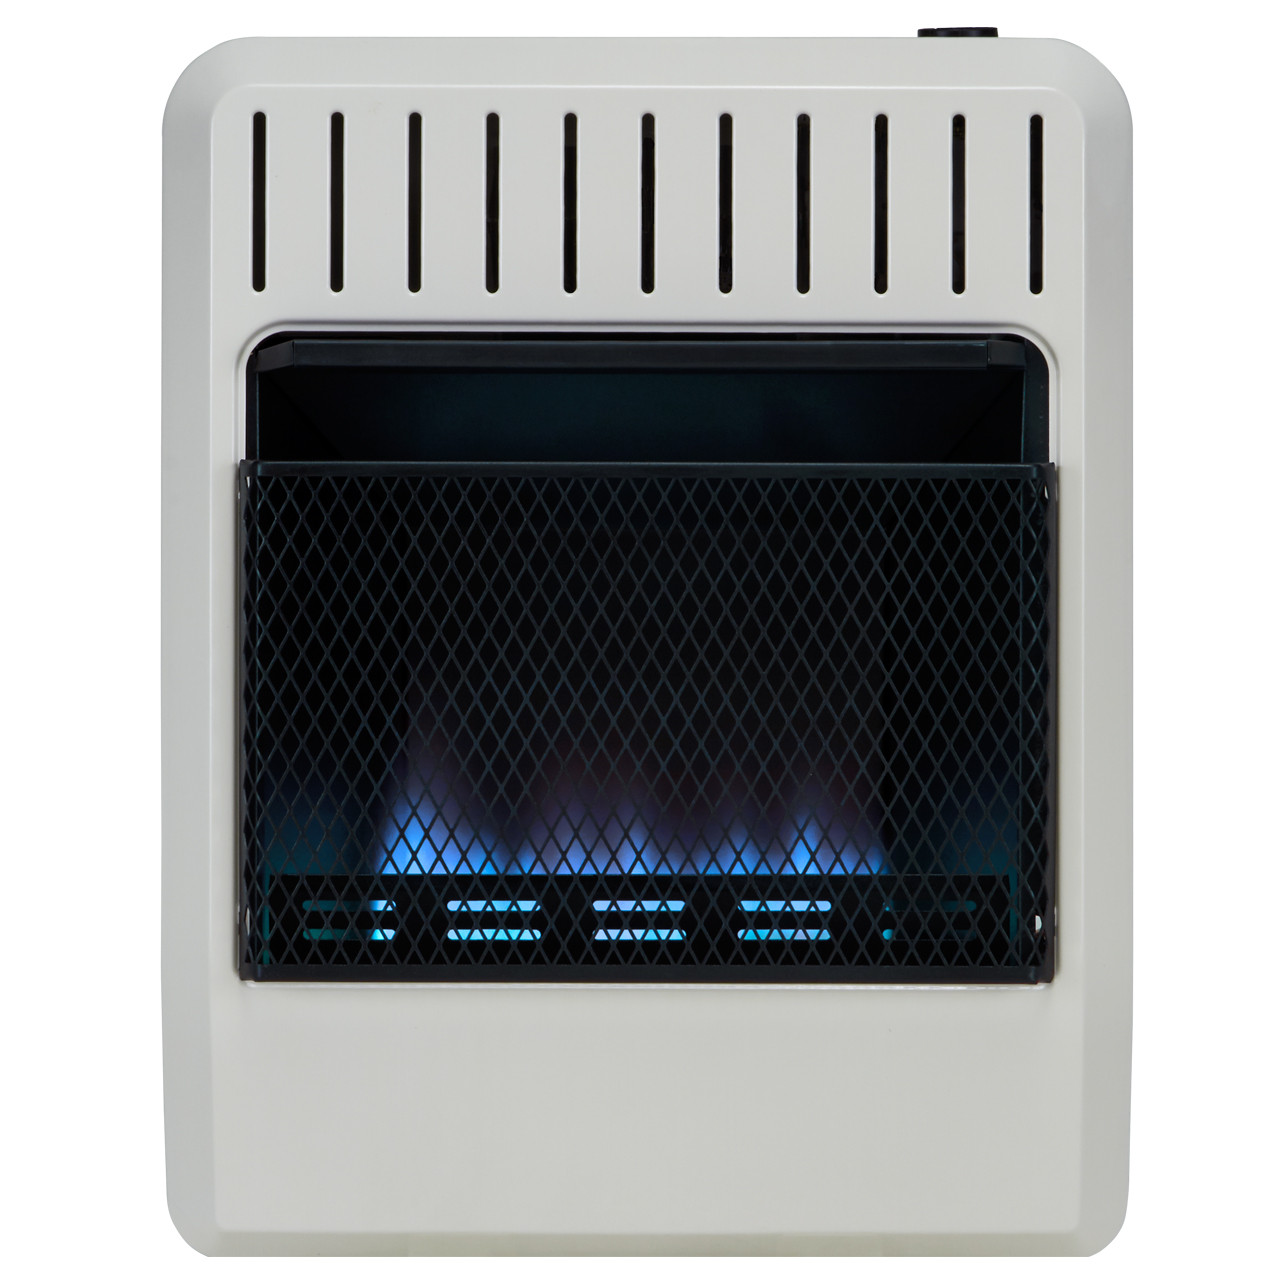 blue flame heater